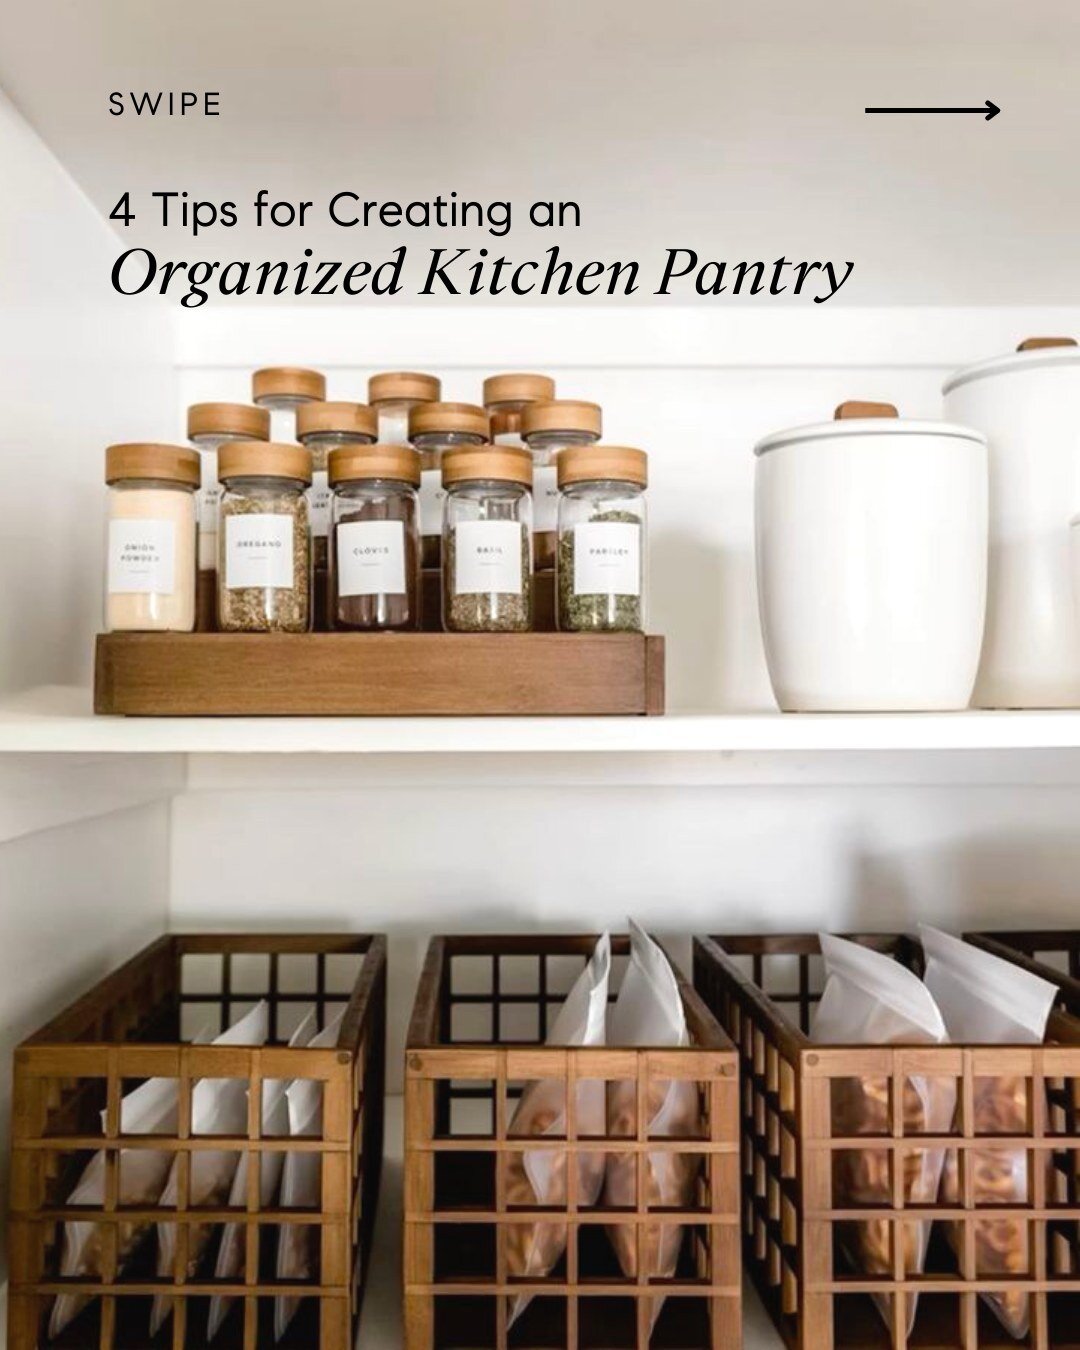 There's nothing more satisfying than having an organized kitchen pantry (especially one that can STAY organized if you have little ones)! ⁠
⁠
Here are my 4 top tips for creating a simple yet effectively organized pantry: ⁠
⁠
✨⁠ Use a lazy Susan to ke